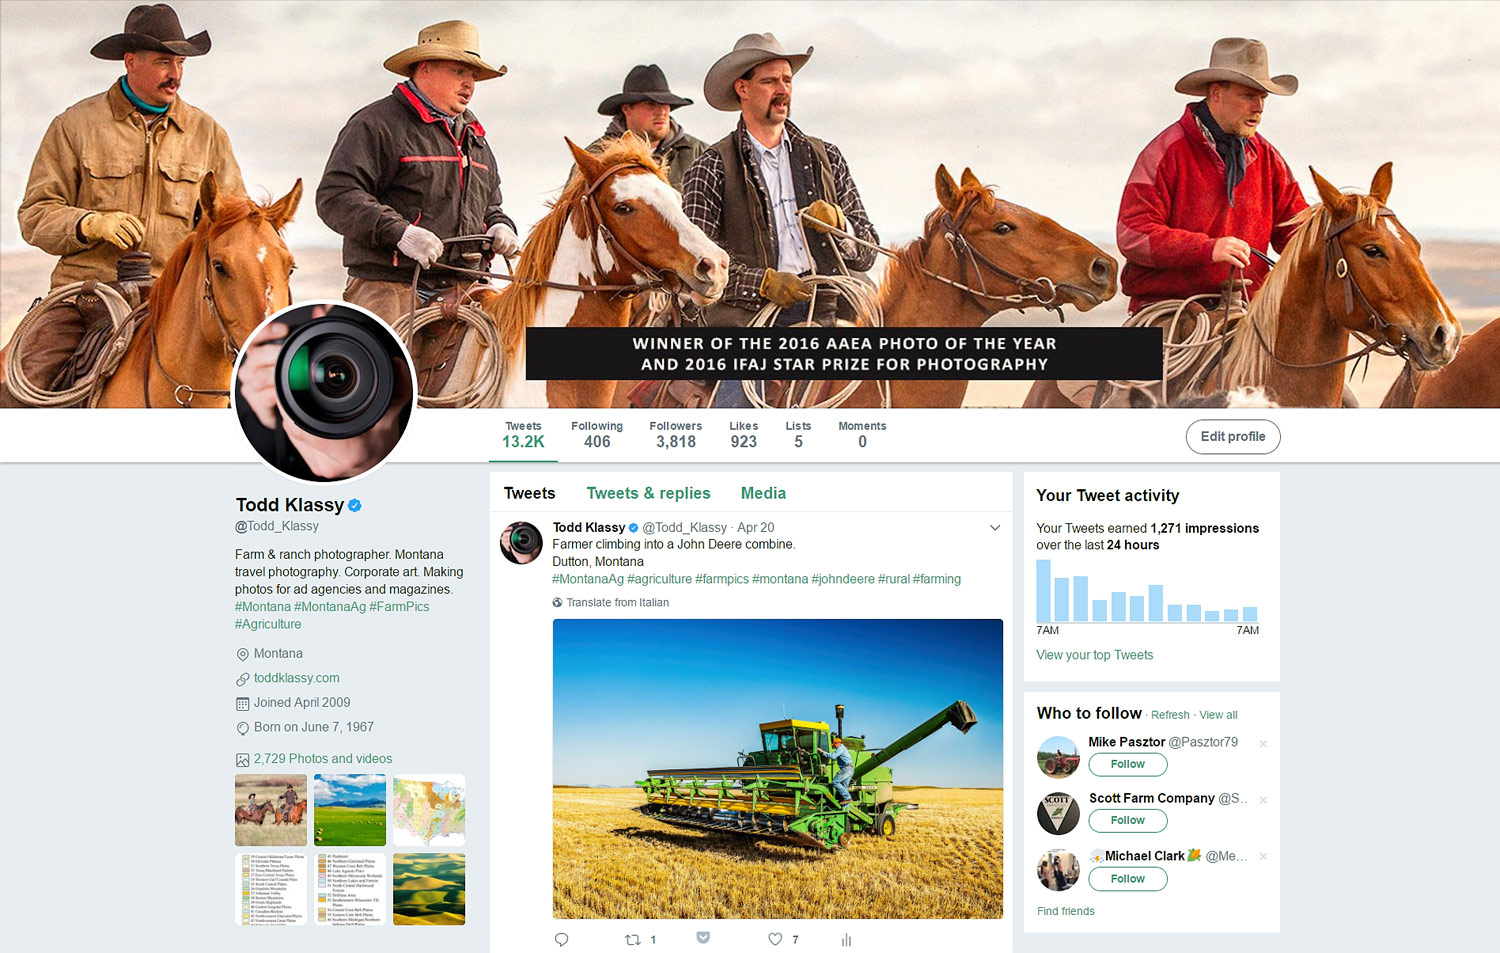 Twitter-Front-Page-for-Todd-Klasy-Agriculture-Photographer.jpg